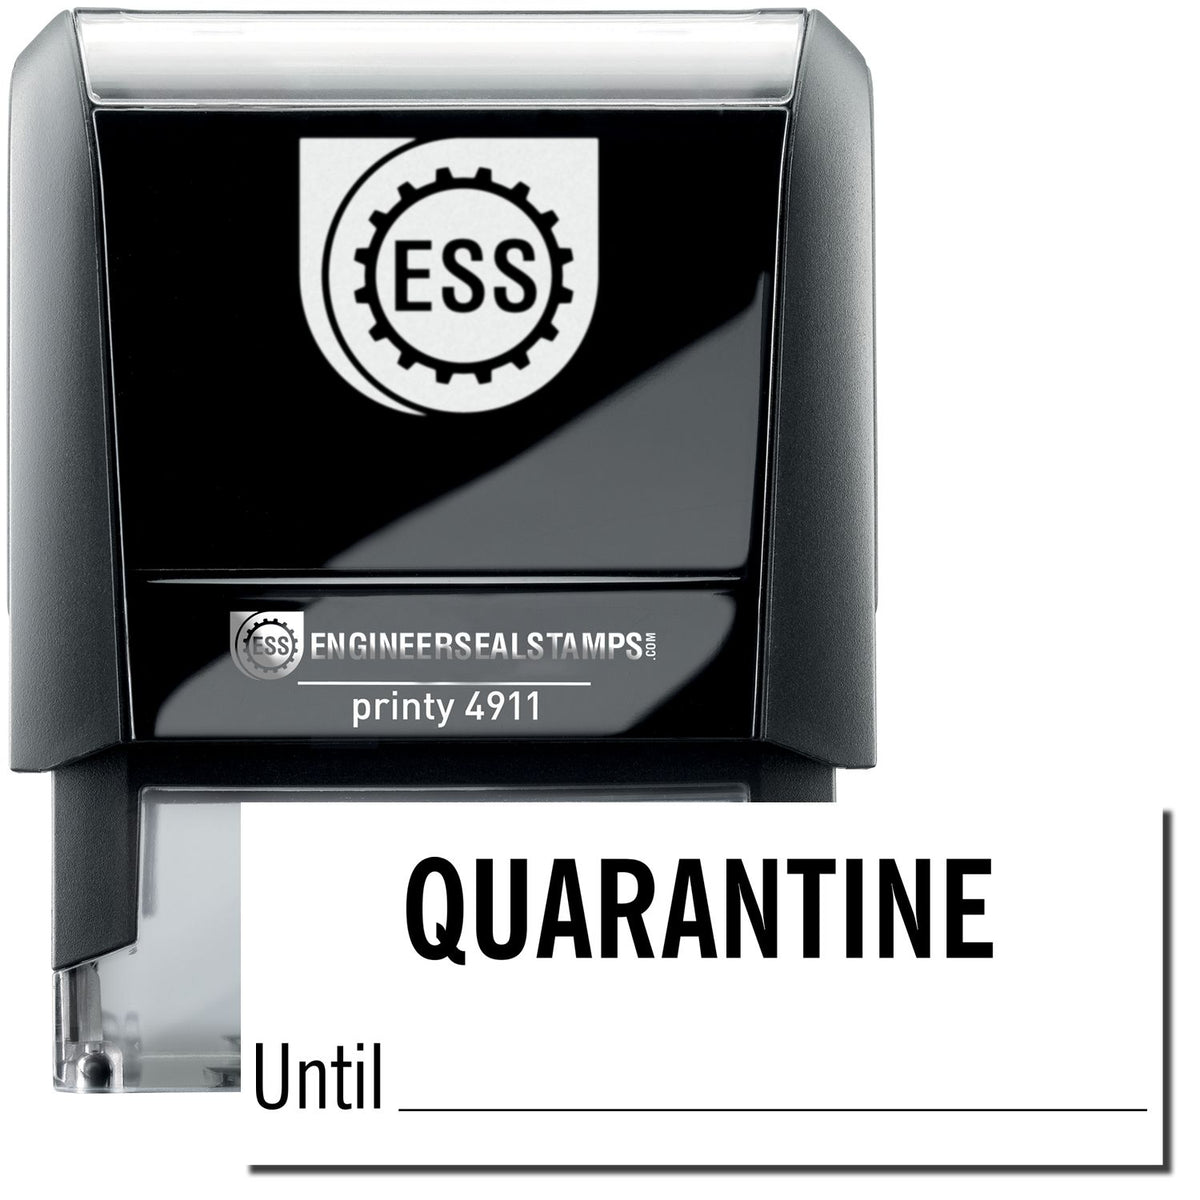 A self-inking stamp with a stamped image showing how the text &quot;QUARANTINE Until&quot; with a line is displayed after stamping.